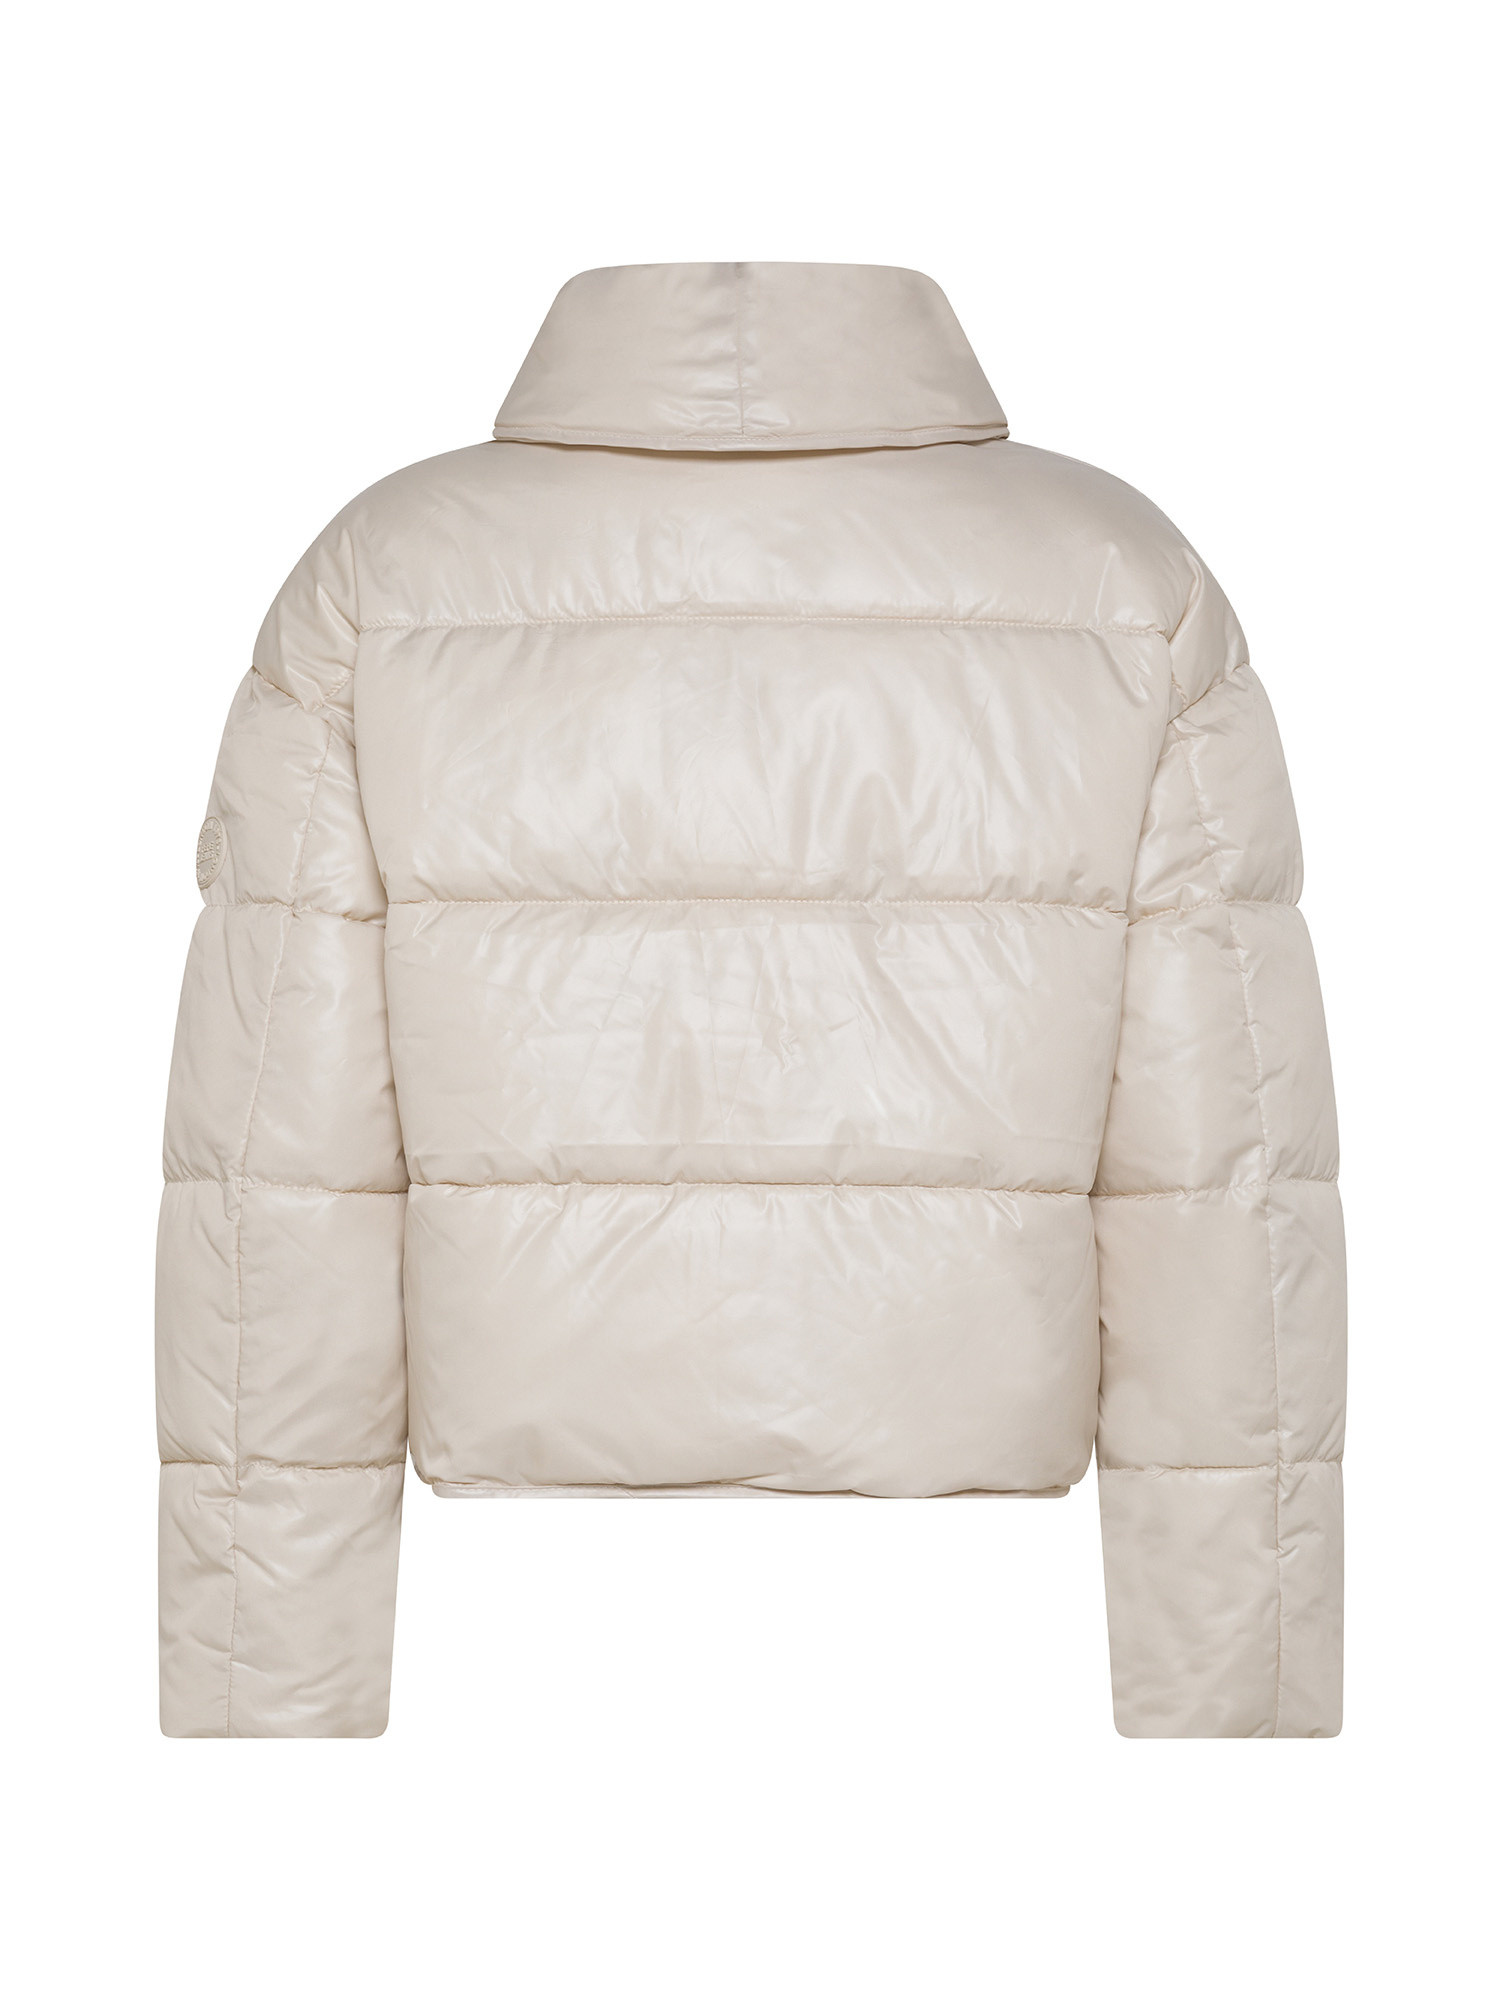 Pepe Jeans - Cropped down jacket in shiny fabric, Cream, large image number 1